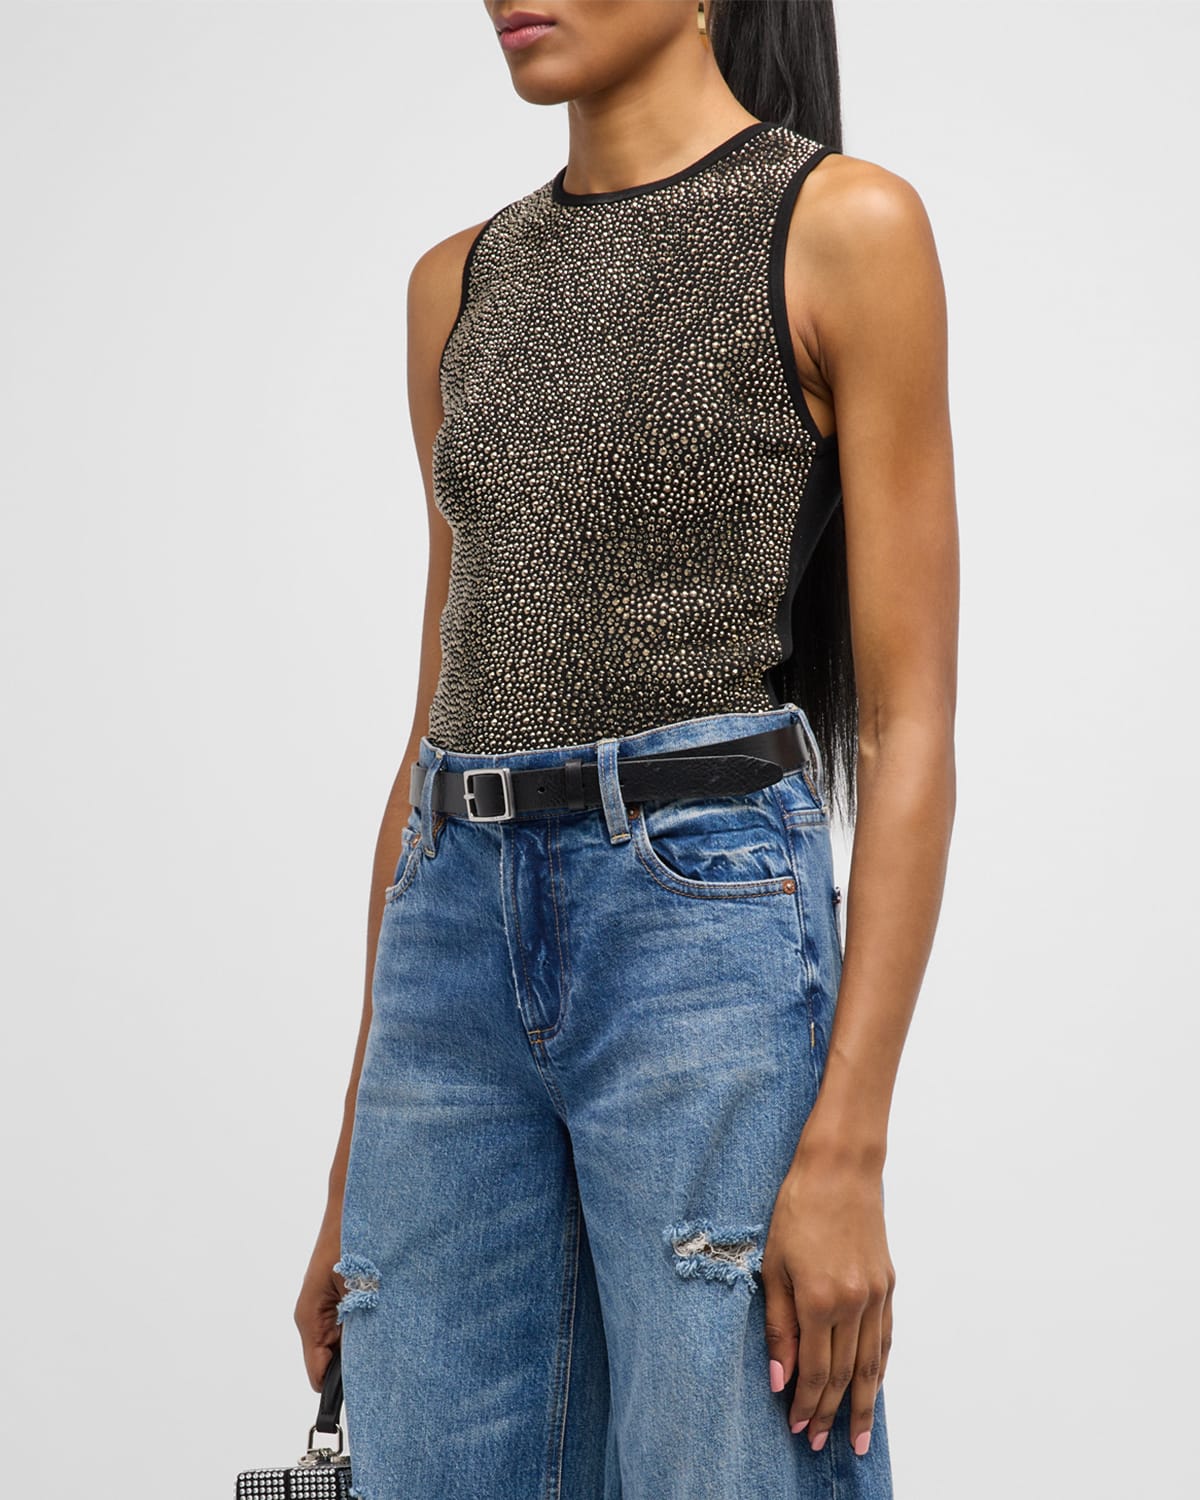 ALICE AND OLIVIA DARINA EMBELLISHED CROPPED TANK TOP